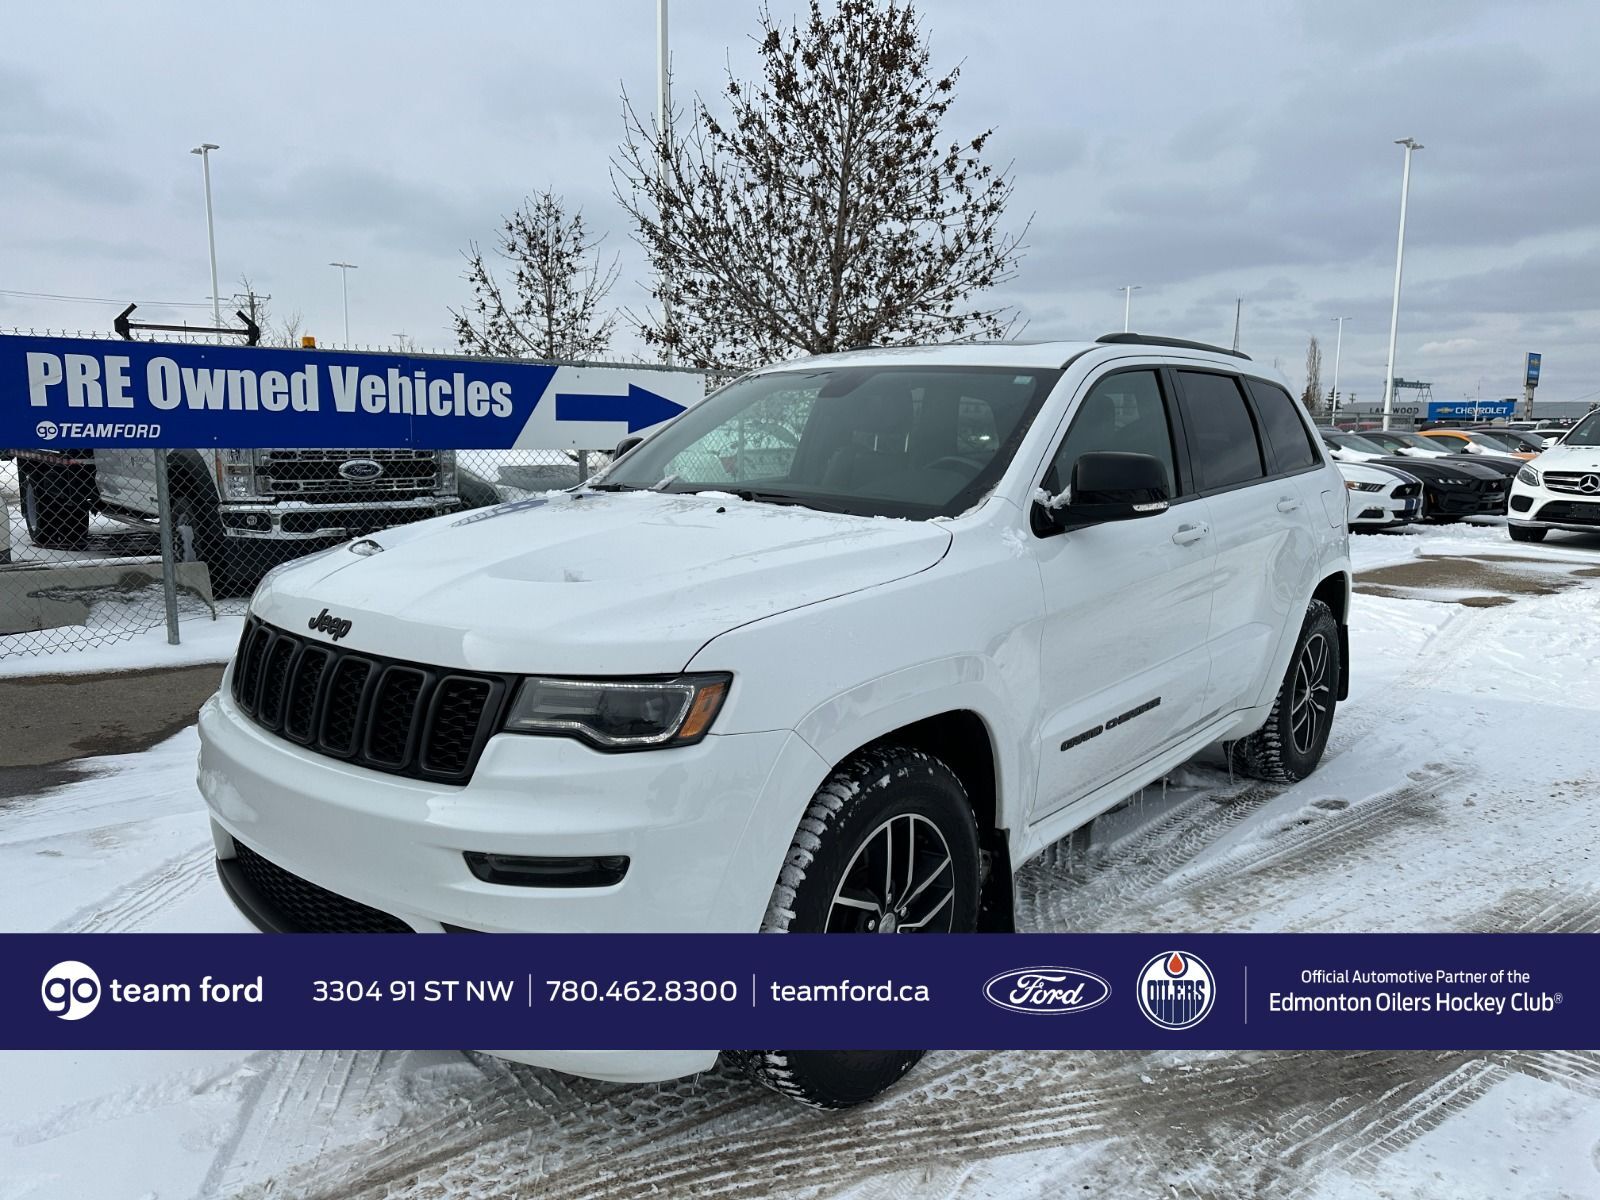 2020 Jeep Grand Cherokee LIMITED - 4X4, LEATHER, HEATED SEATS, REAR CAMERA,